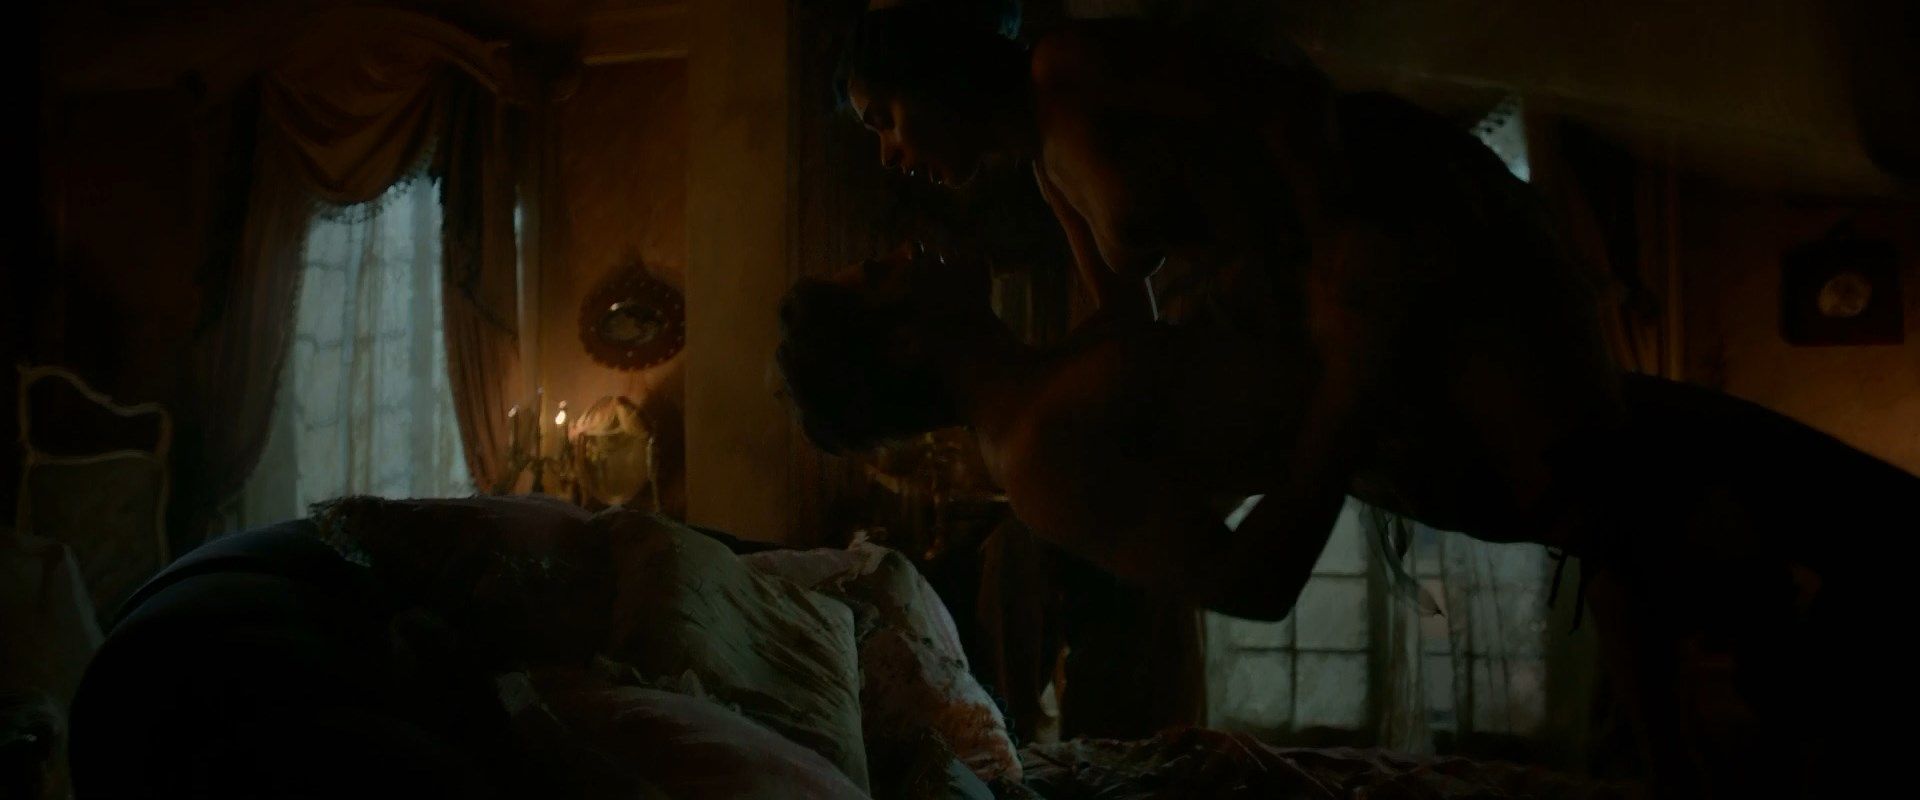 more nude sex scene from the fantastic series 'Carnival Row' (201...